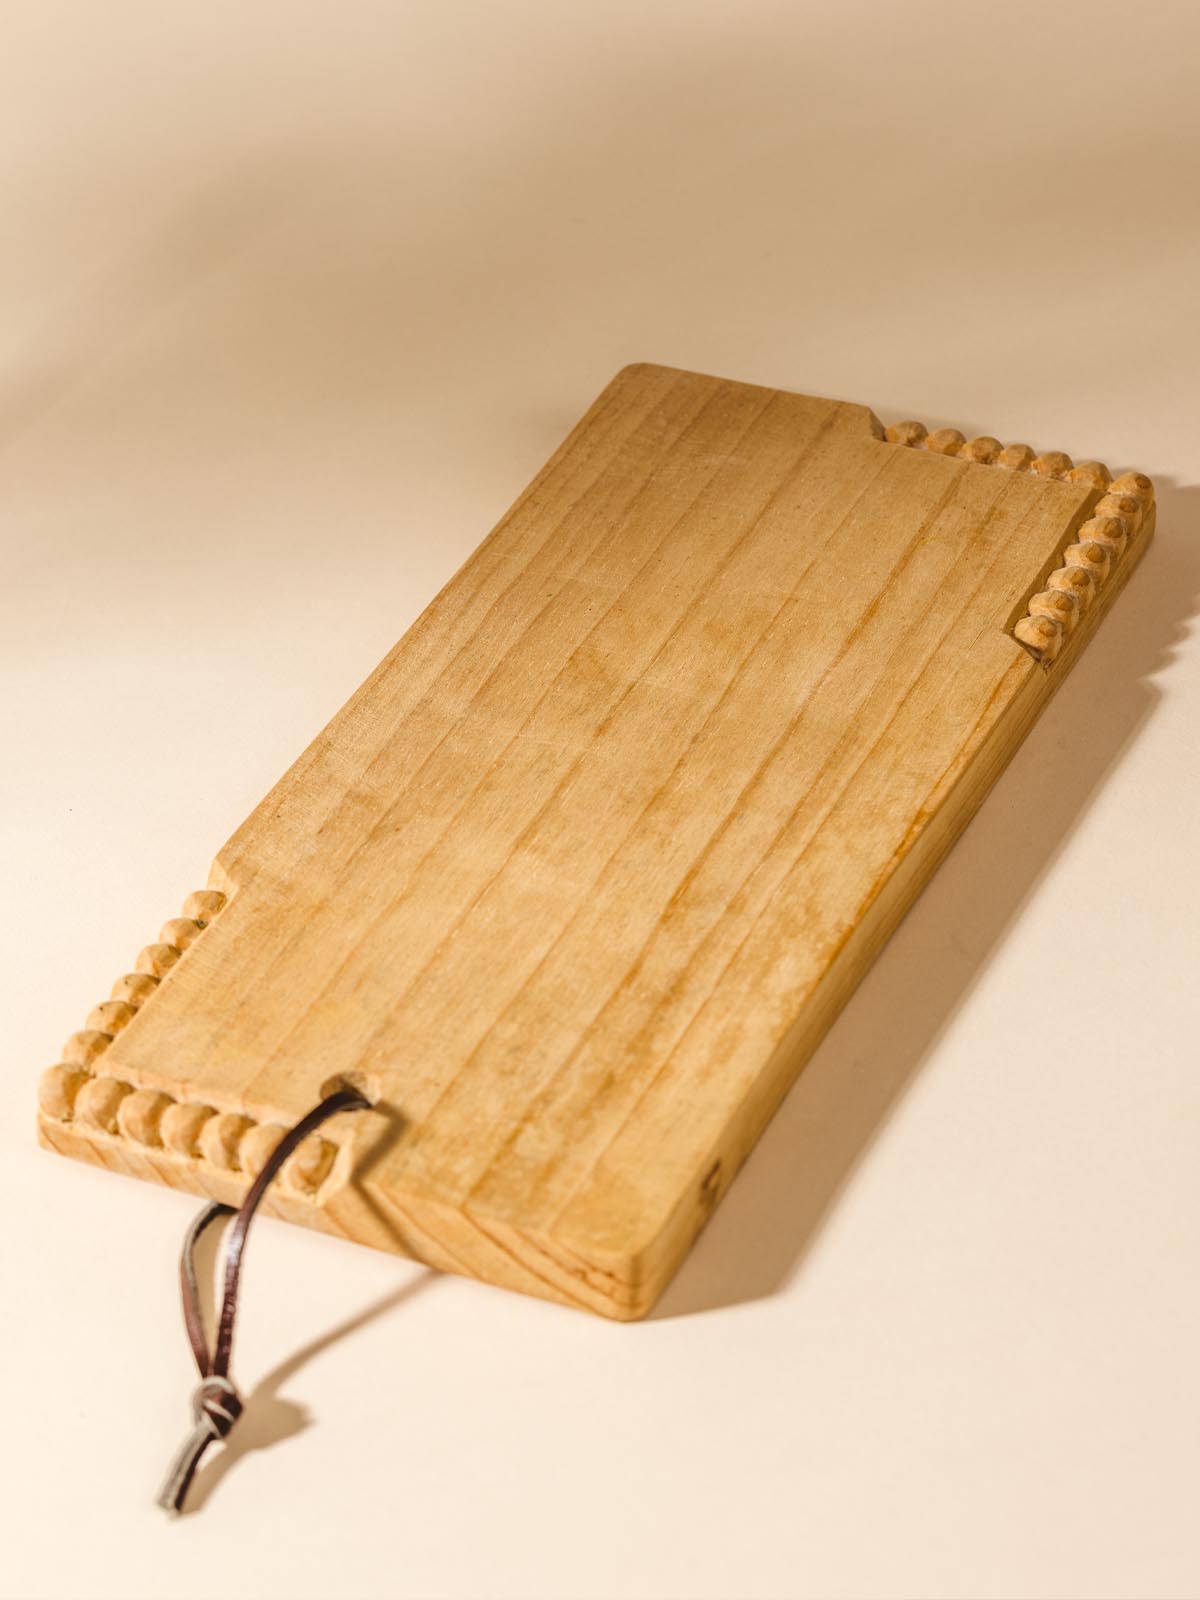 Small rectangular handmade serving board with circular detail carving on the top right and bottom left corners. Top of board contains a dark leather strap for hanging.